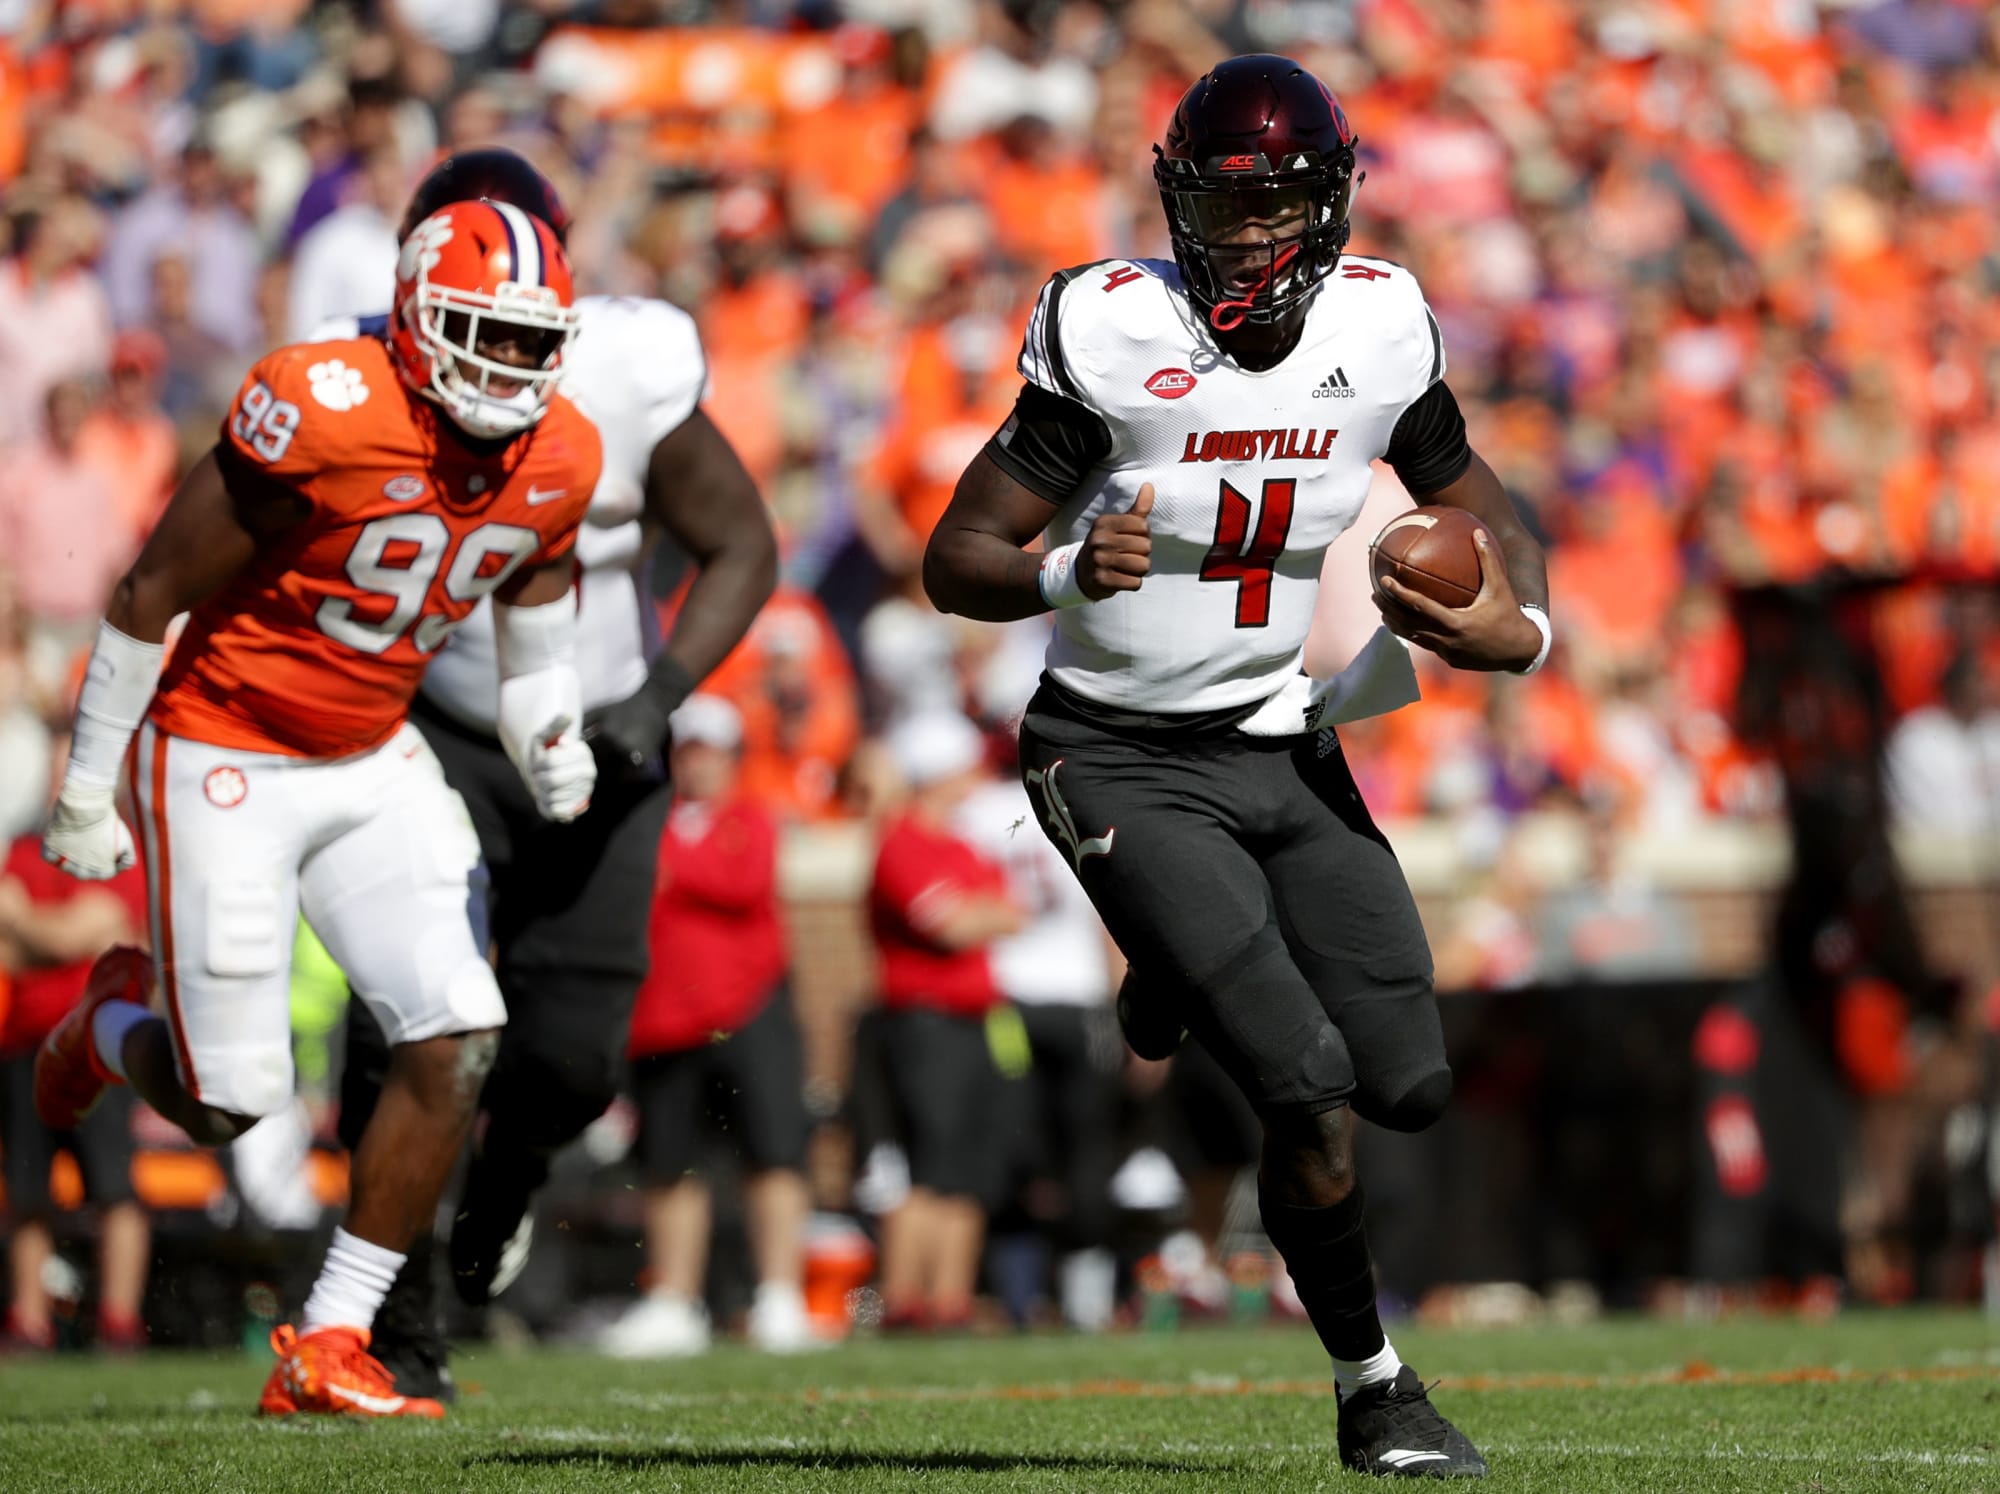 Louisville football: Scott Satterfield and the Cards prepare for Goliath